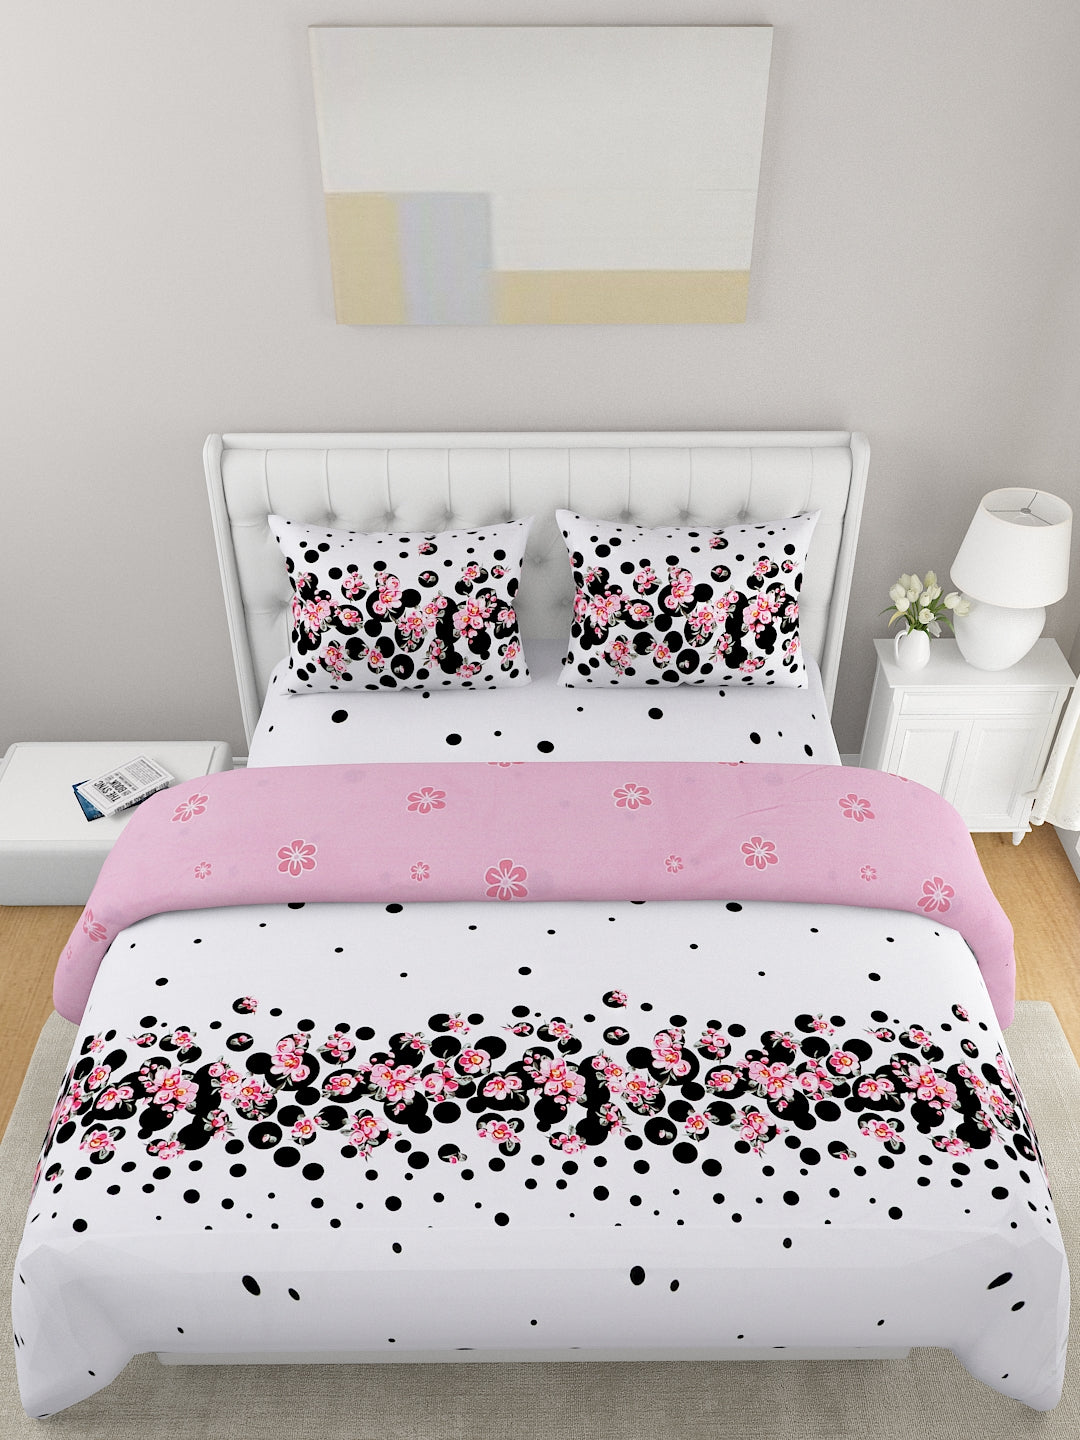 4-Pcs Pink White Printed Double Queen Bedding Set